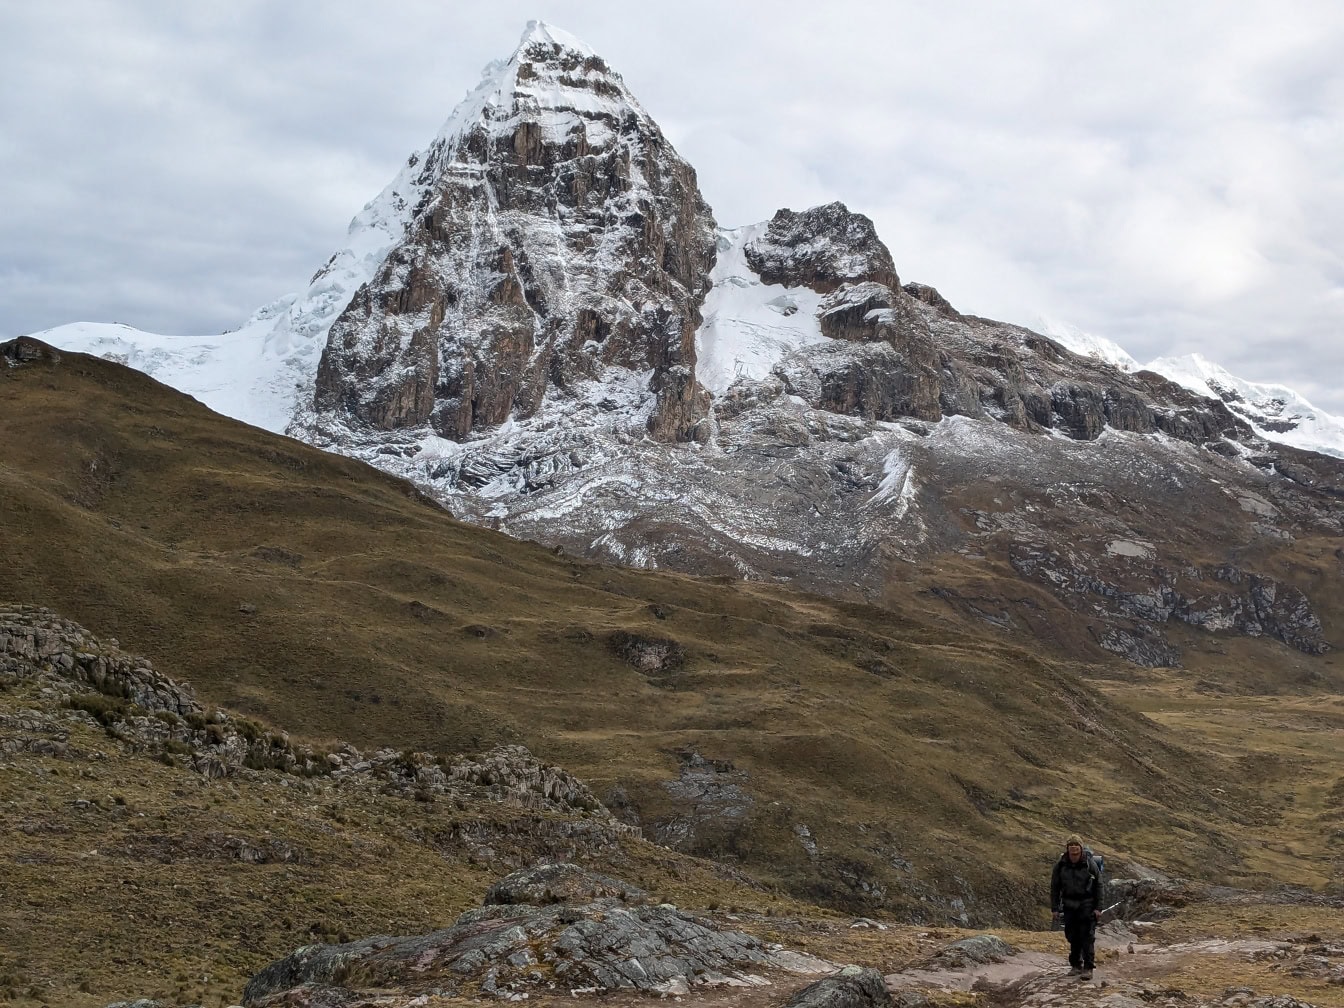 Man walking on a path with a snowy mountain peak in the background